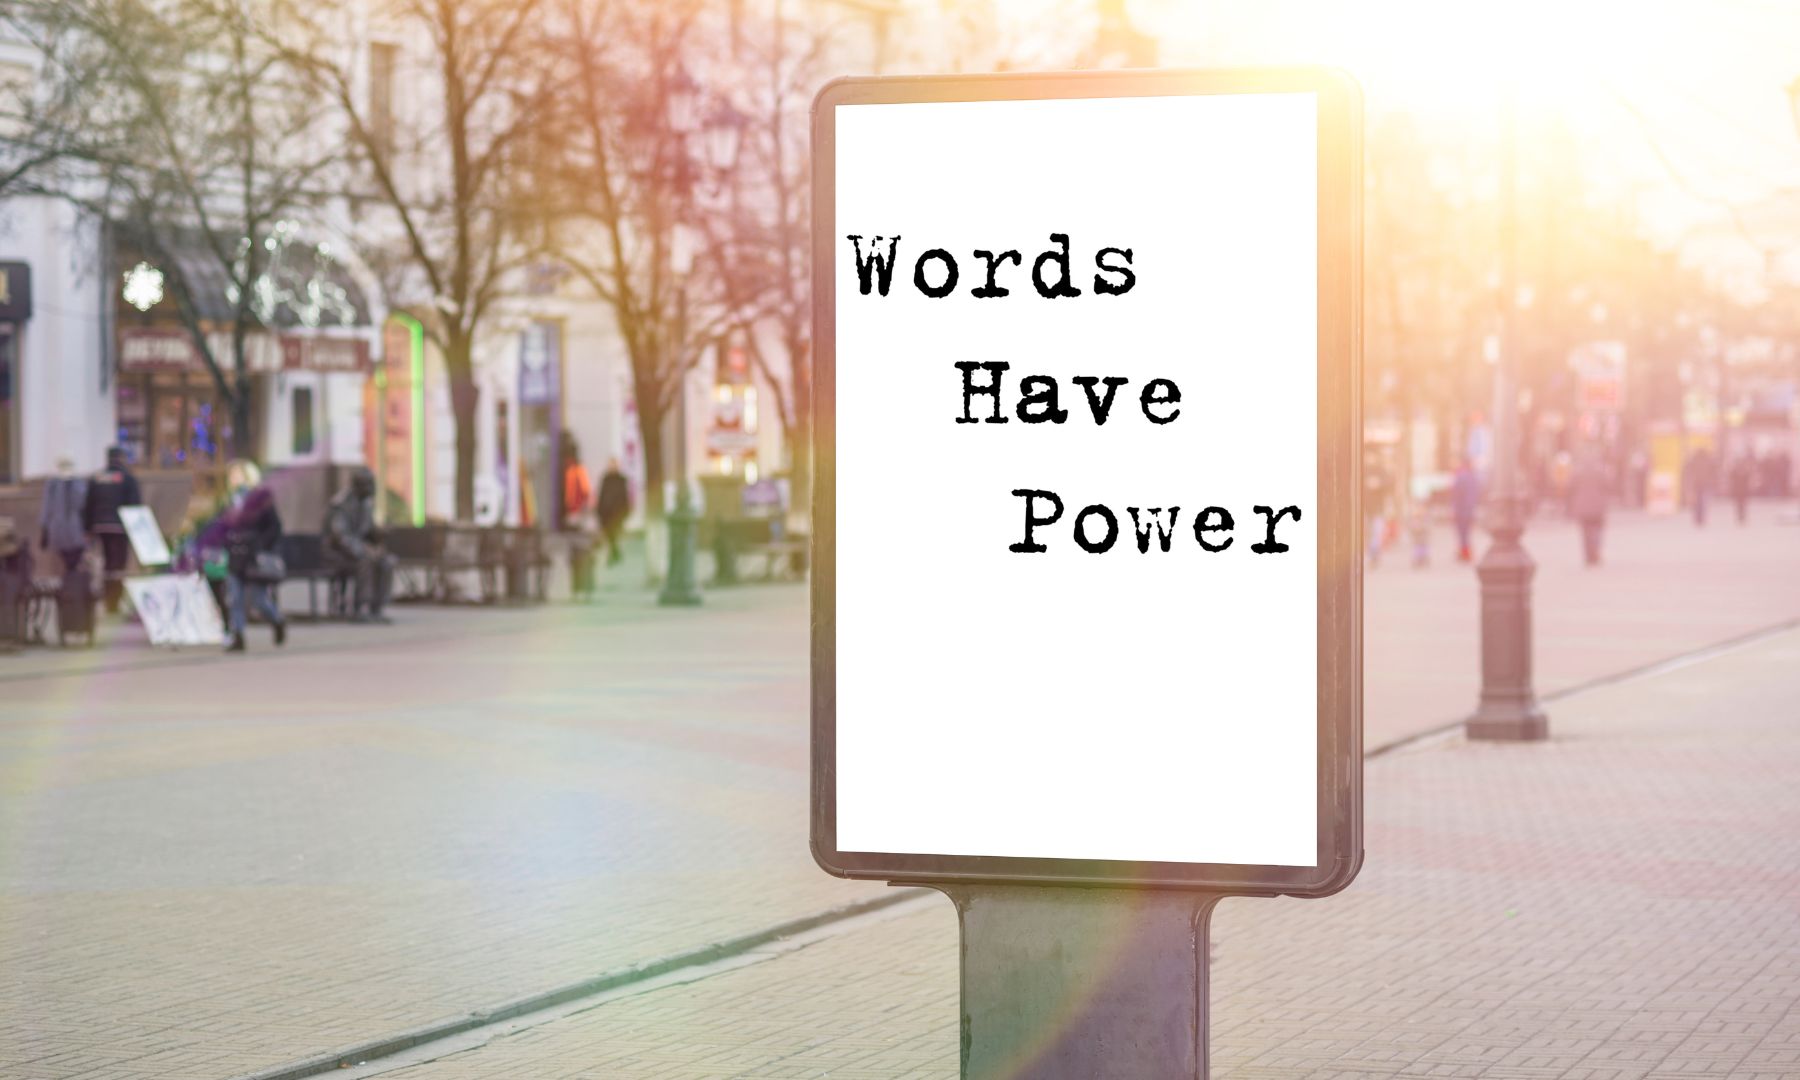 Image of a sign that says 'words have power'